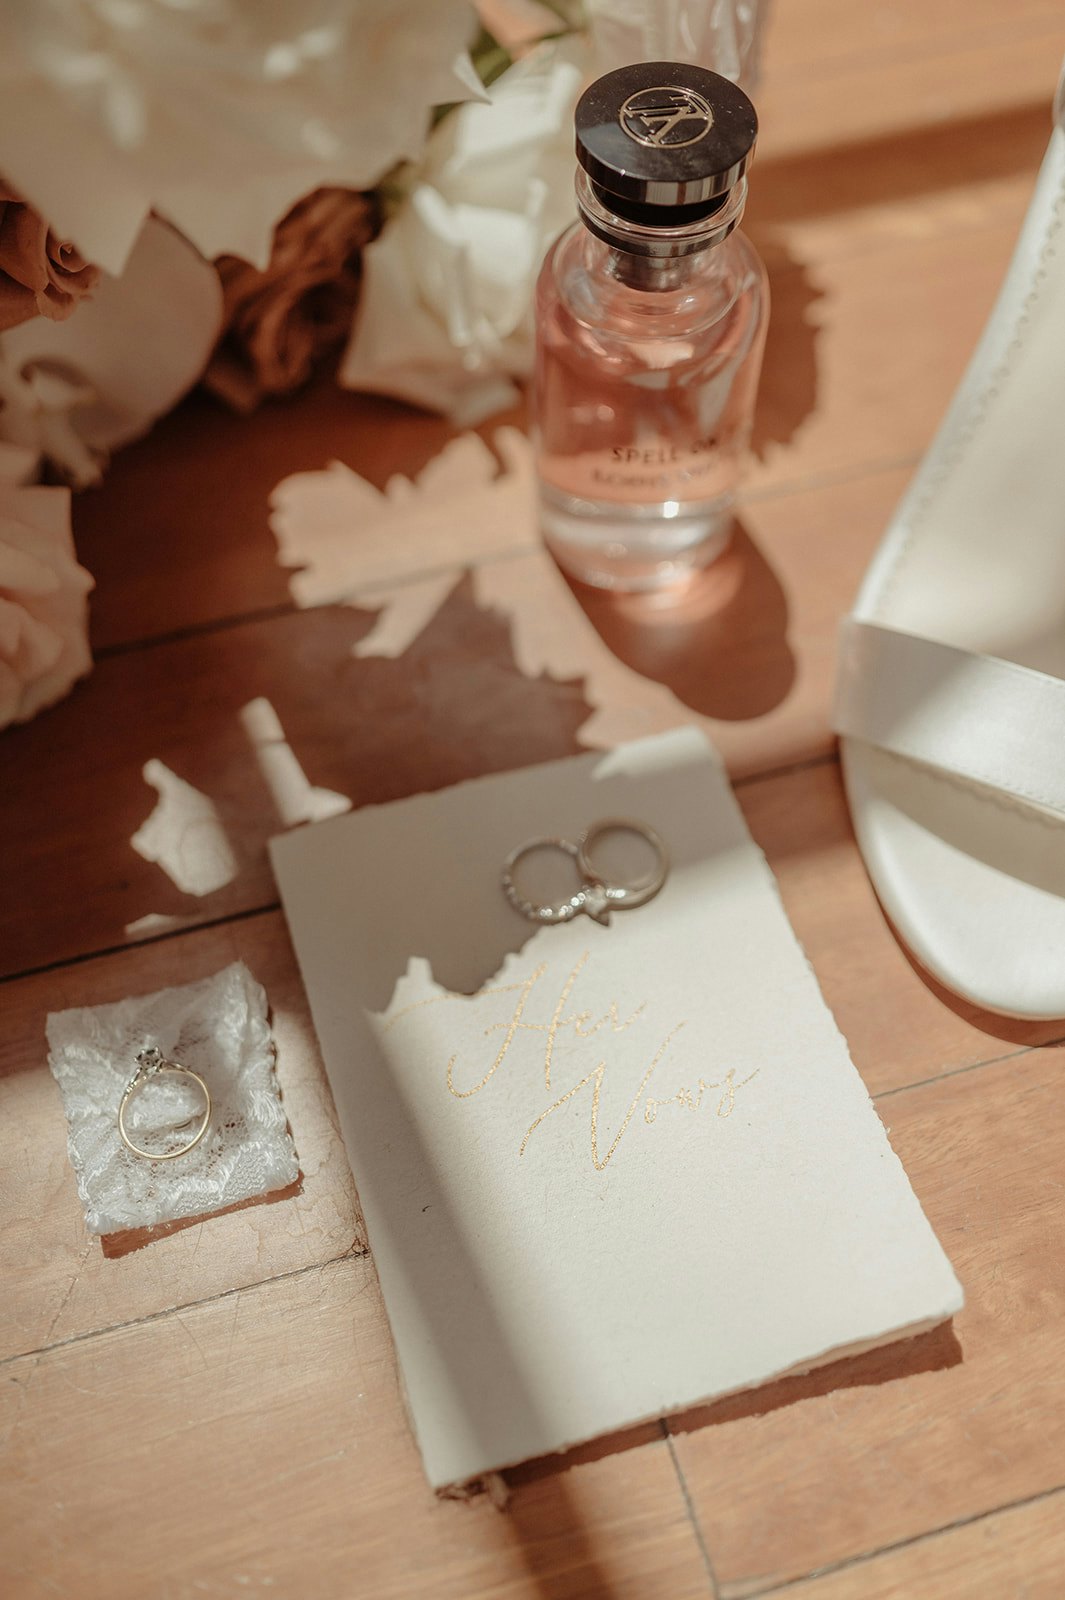 Wedding invitations, rings and flowers